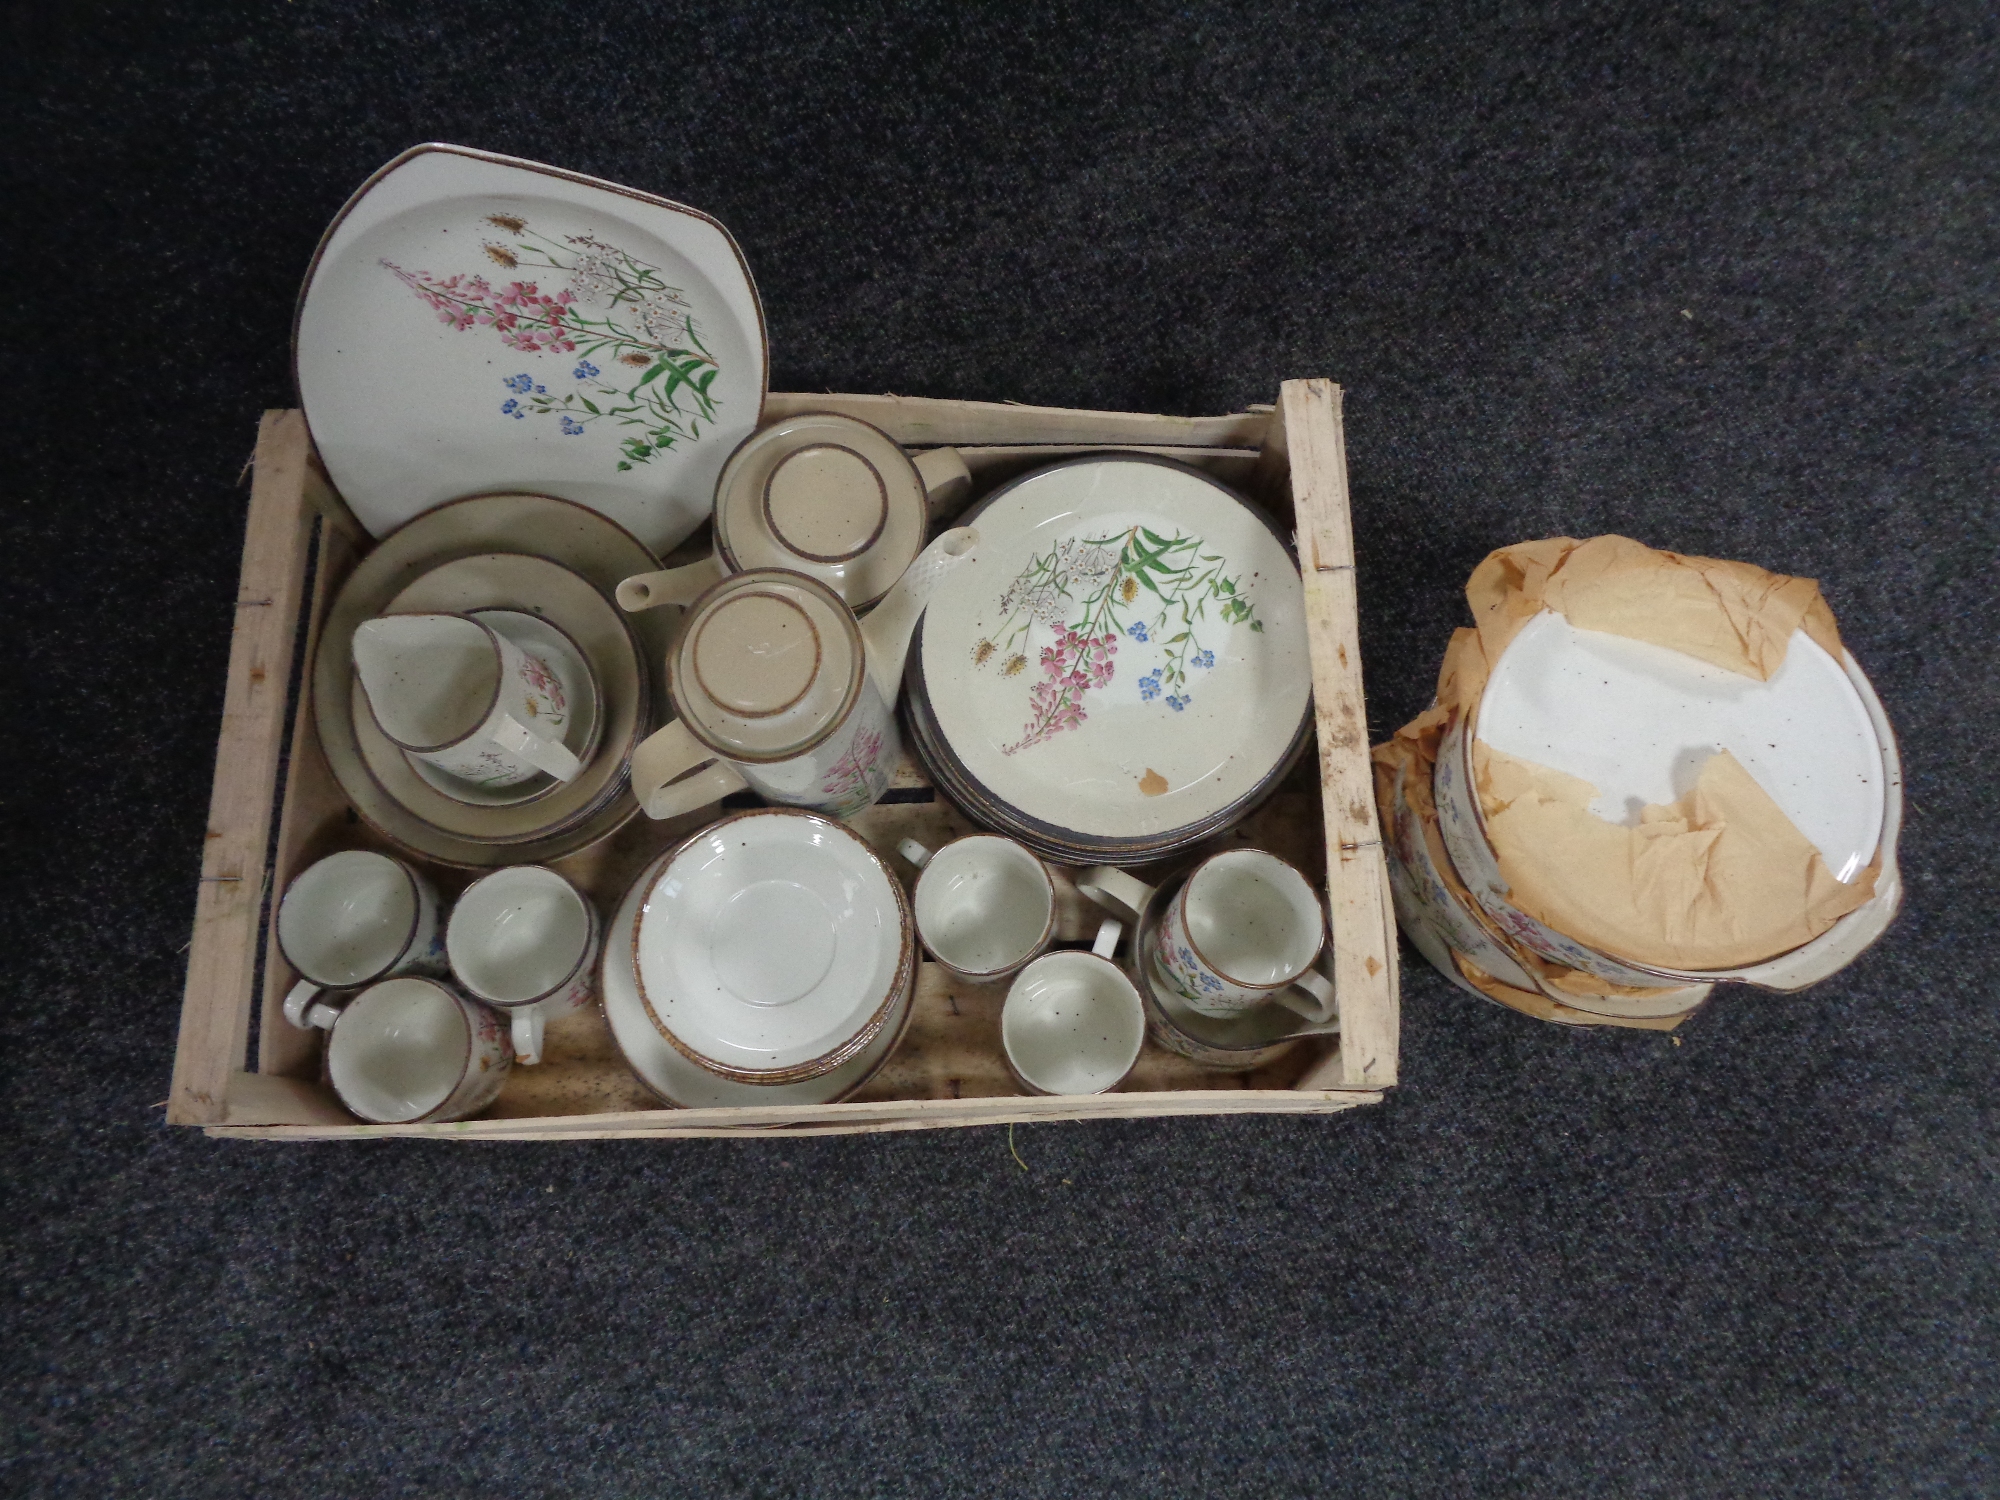 Two boxes containing assorted glassware and J&G Meakin oven to table ware dinner set